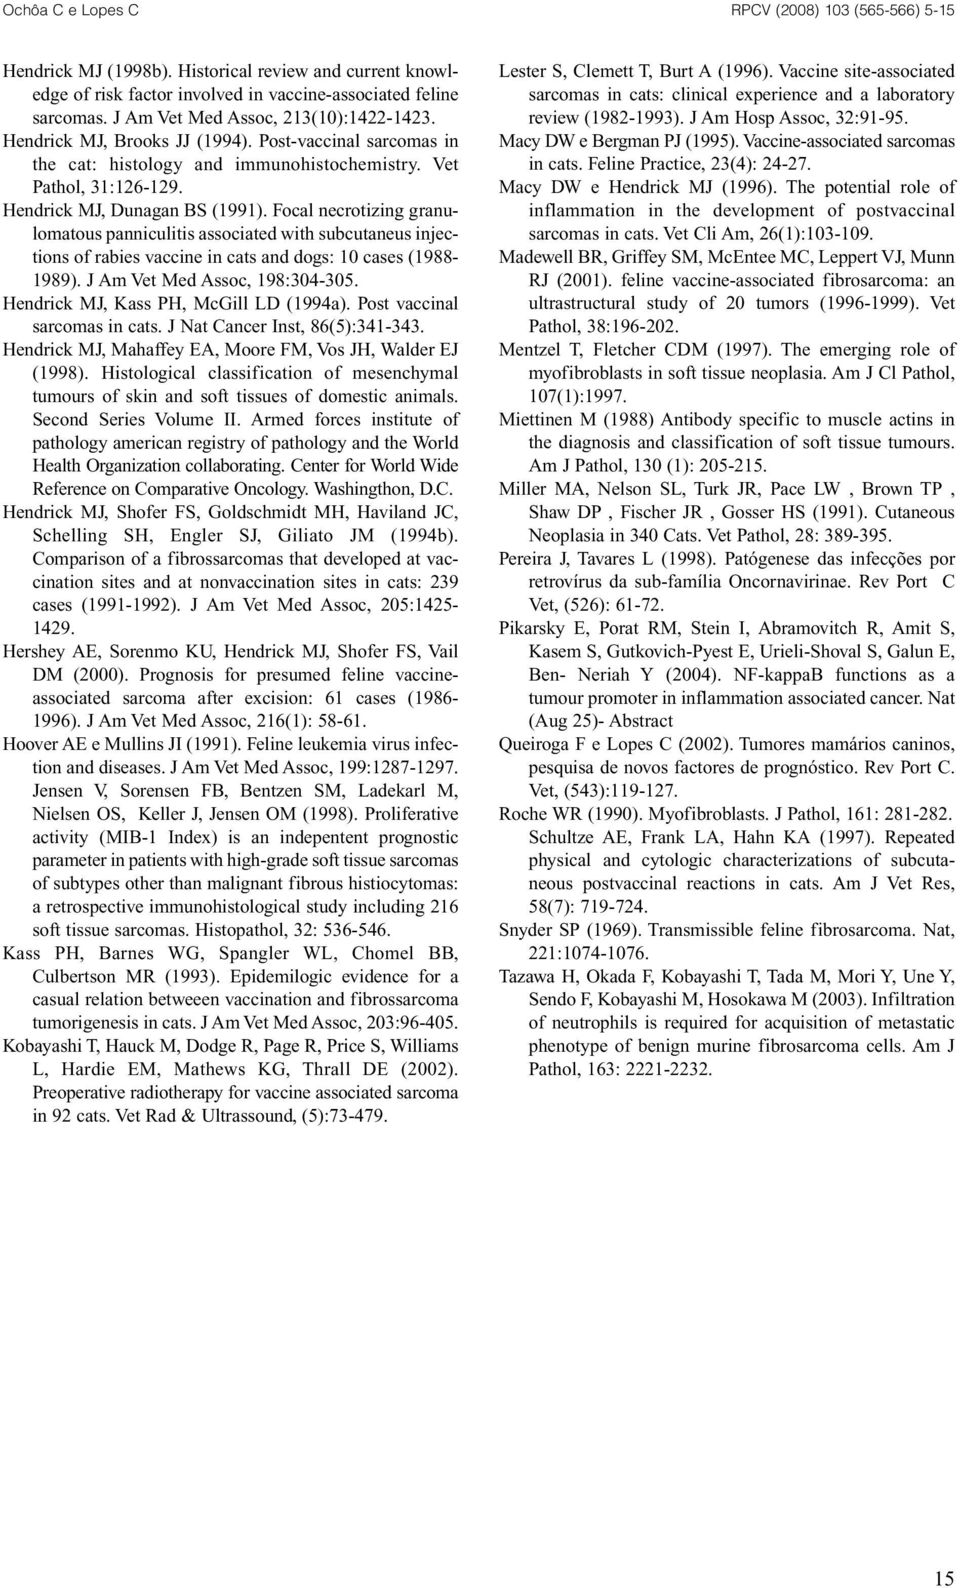 Focal necrotizing granulomatous panniculitis associated with subcutaneus injections of rabies vaccine in cats and dogs: 10 cases (1988-1989). J Am Vet Med Assoc, 198:304-305.